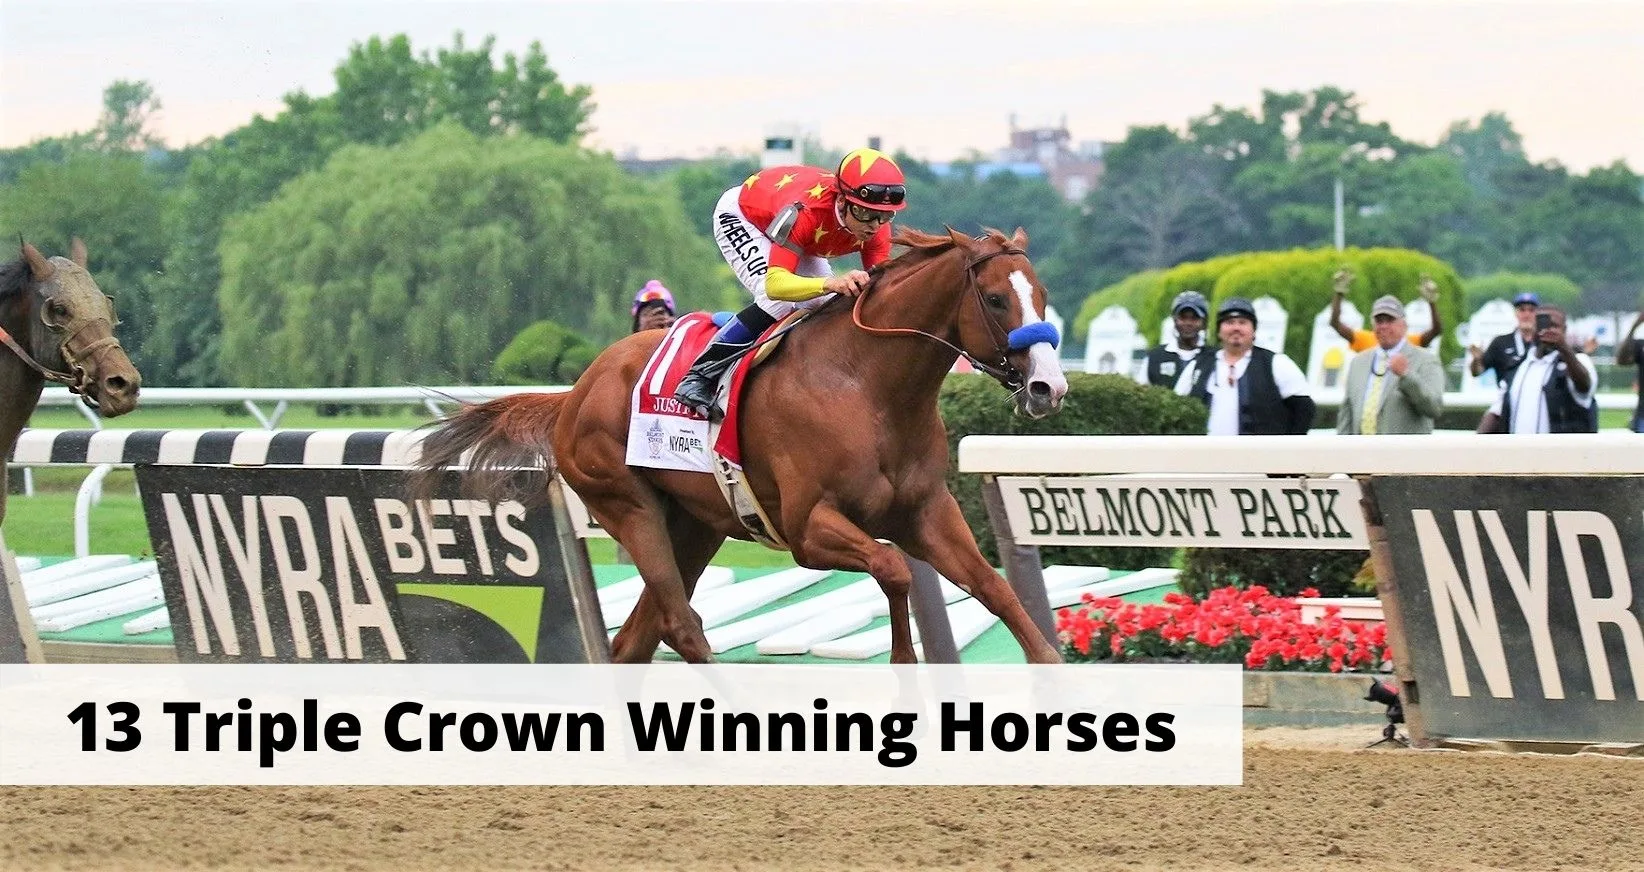 All 13 Triple Crown winning horses. Facts, History, and photos